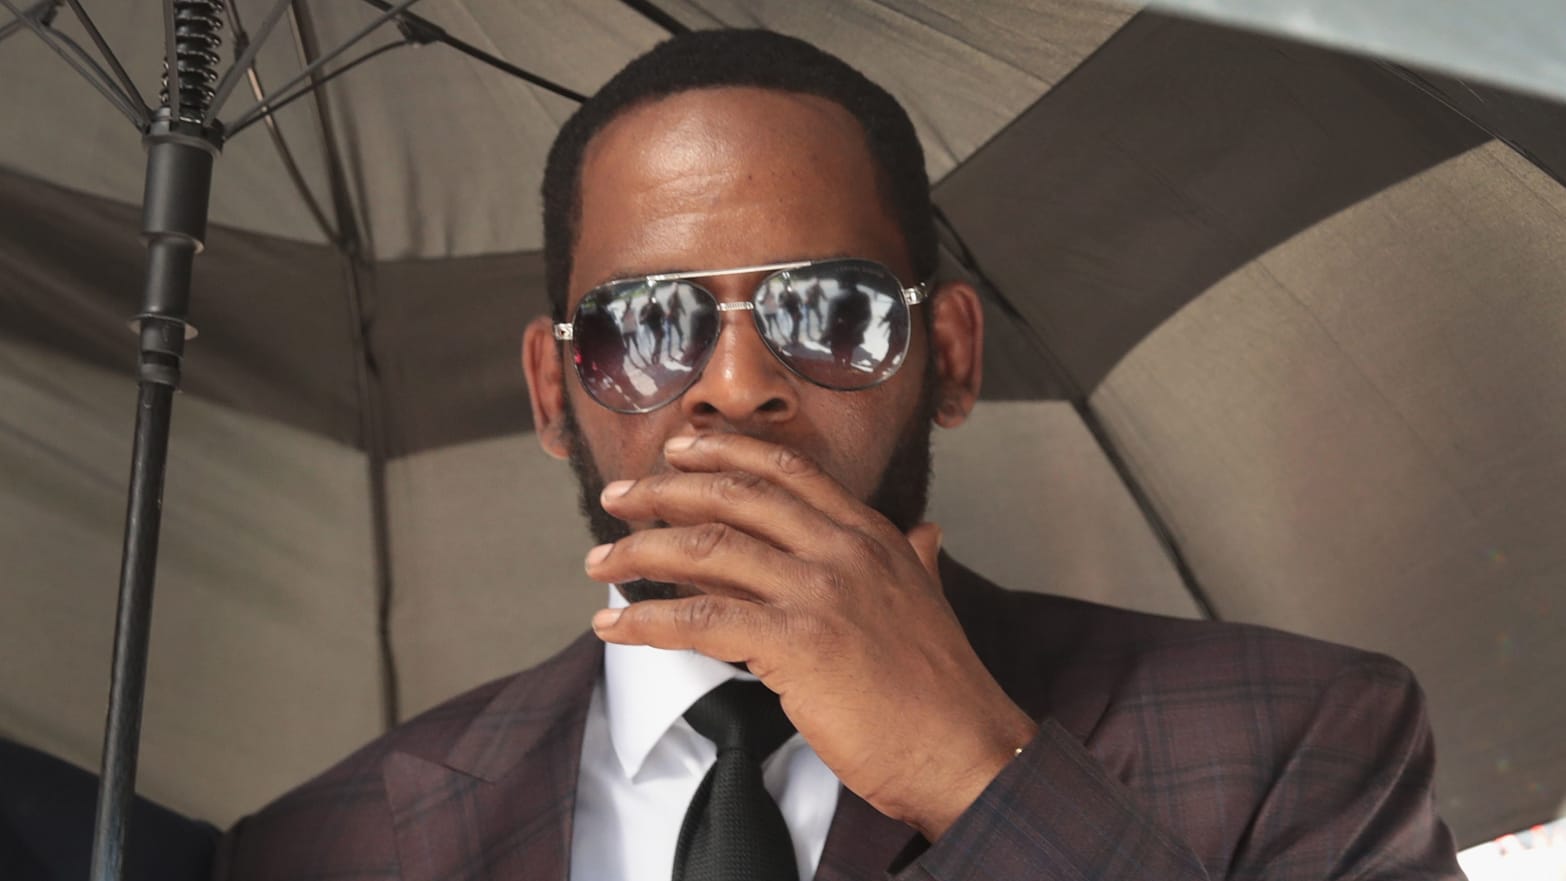 Blazers Kidnapper X X X - R. Kelly Convicted in Brooklyn Federal Case on Sex Crimes